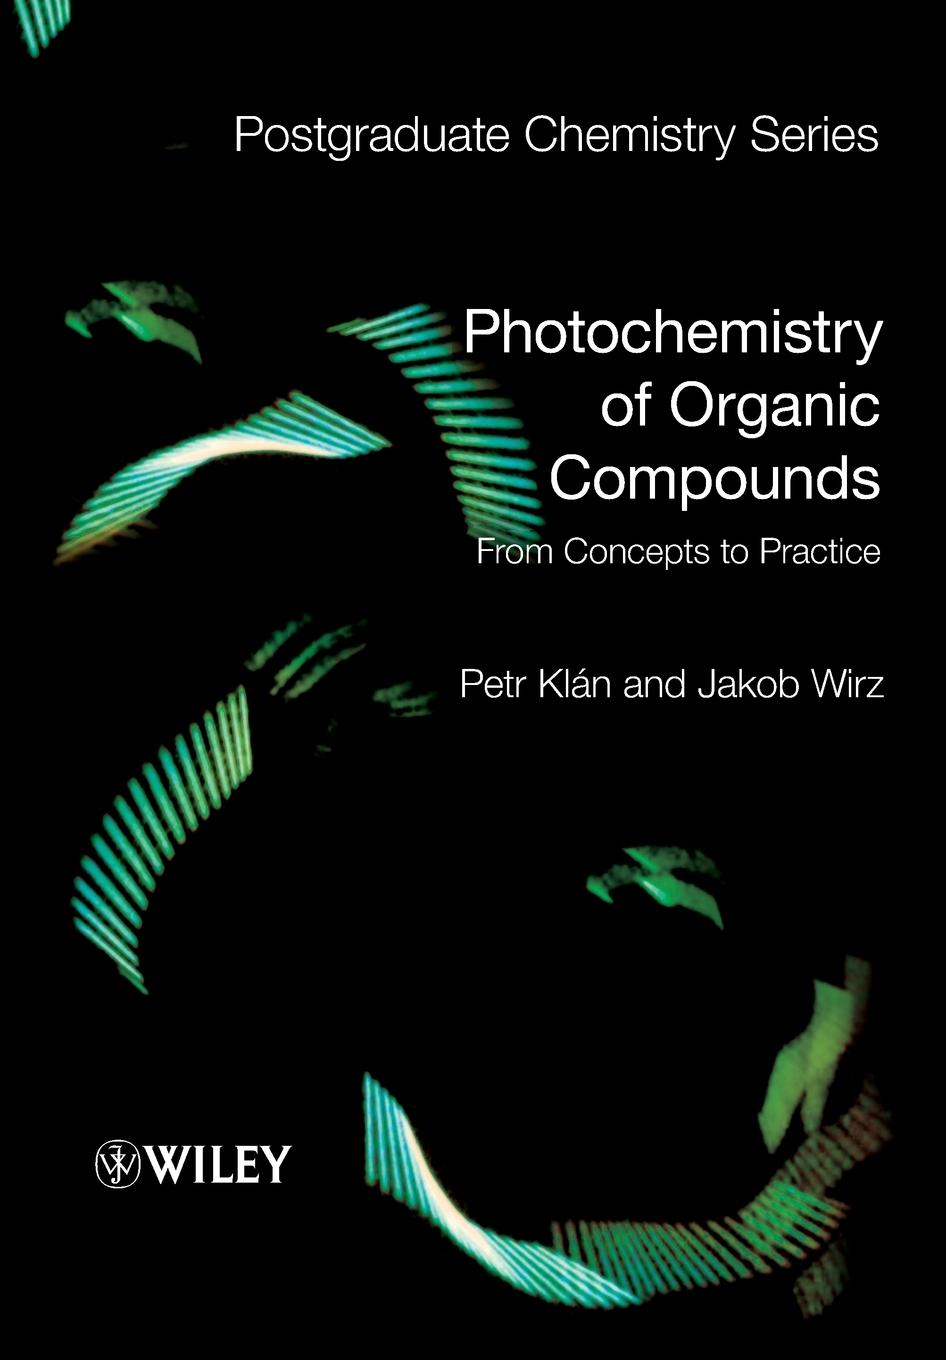 Photochemistry of Organic Compounds: From Concepts to Practice - Petr Klán|Jakob Wirz